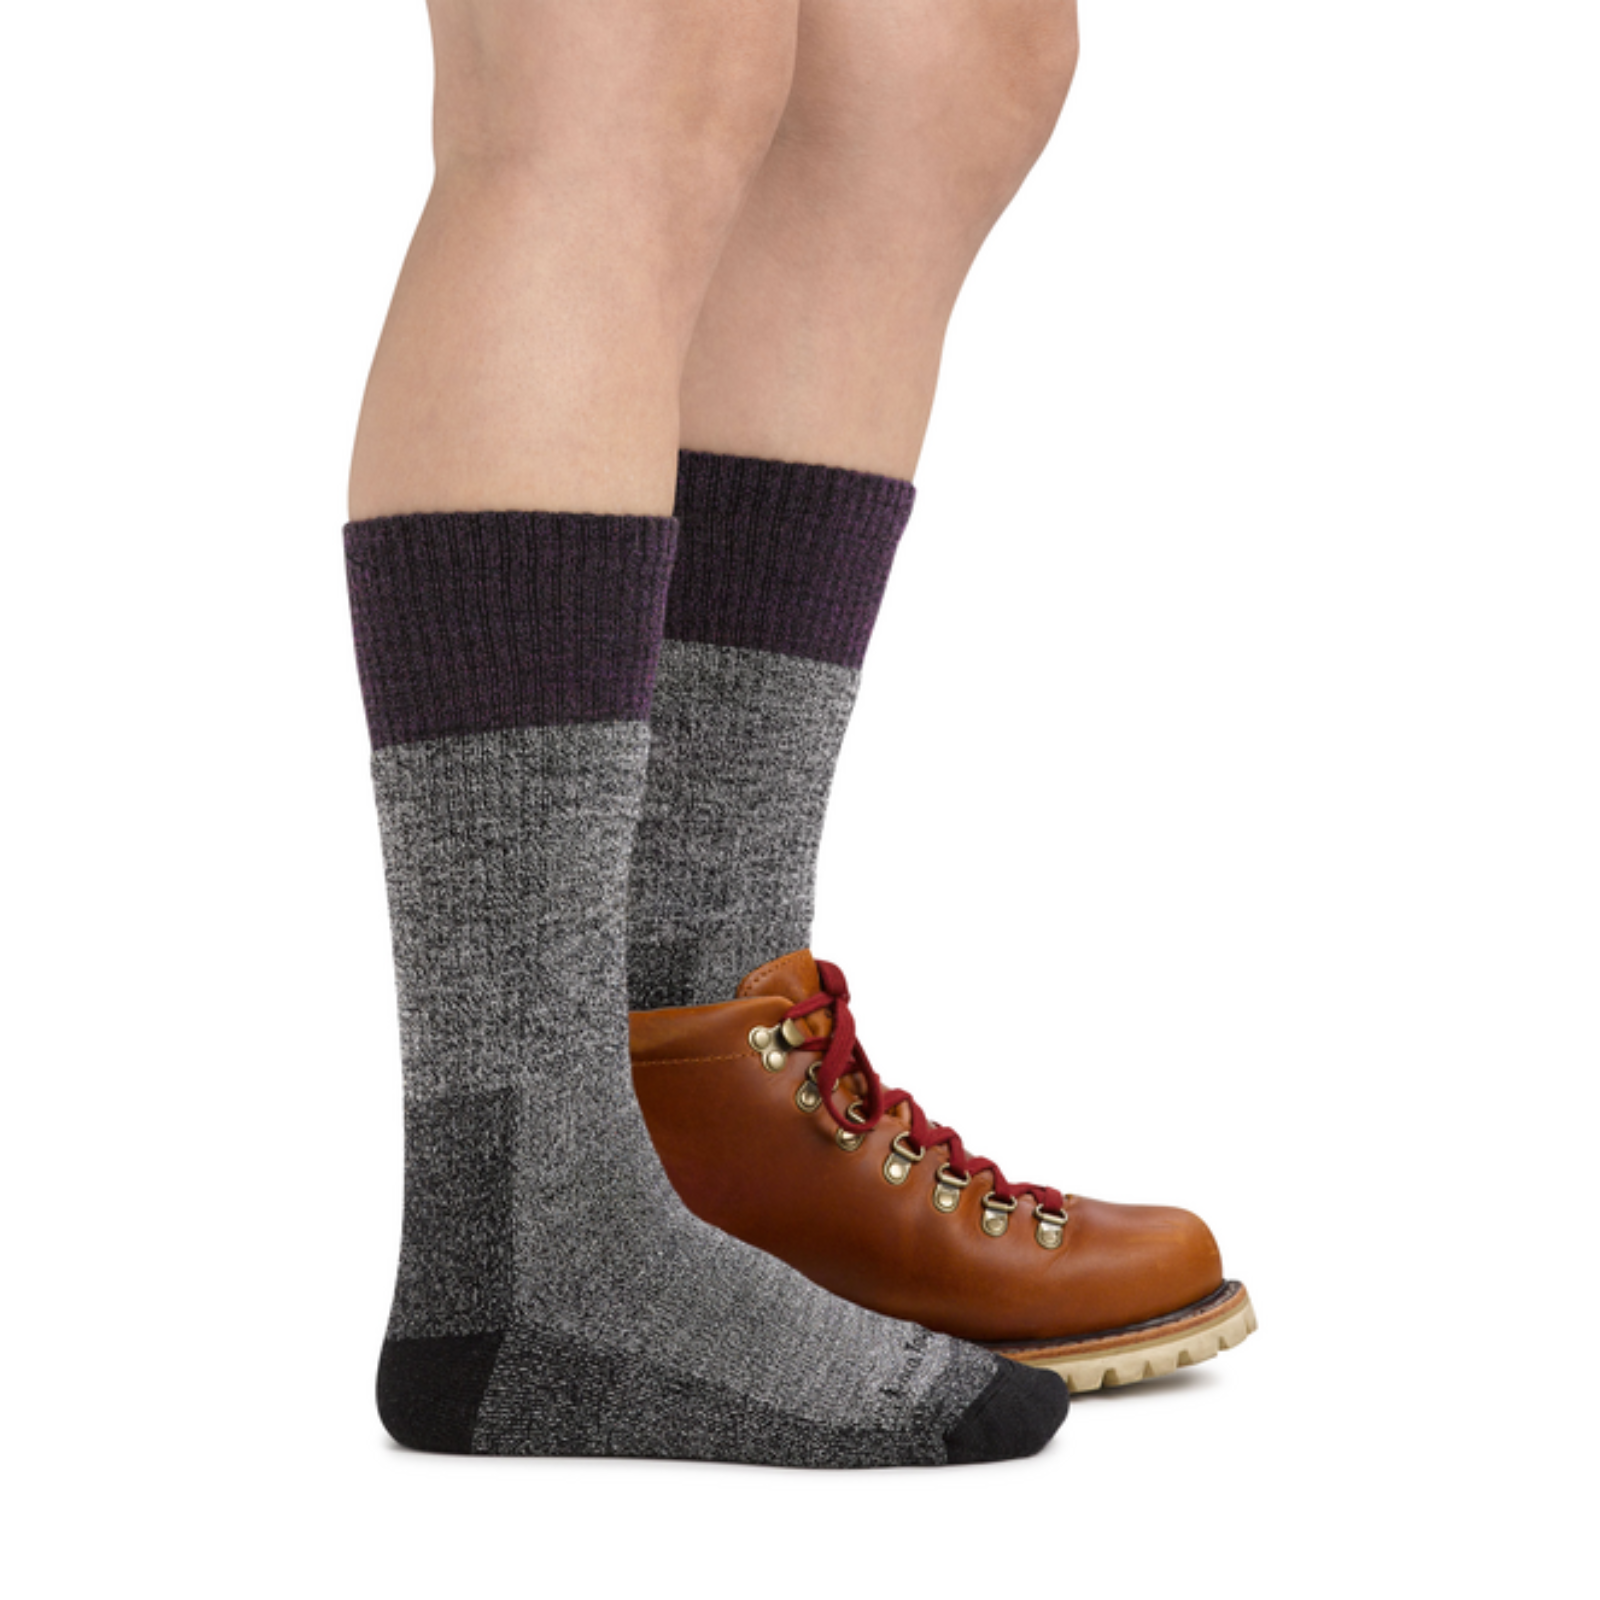 Darn Tough 1983 Scout Midweight Hiking Boot women's sock featuring grey sock with purple cuff worn by model wearing one hiking boot to show the size